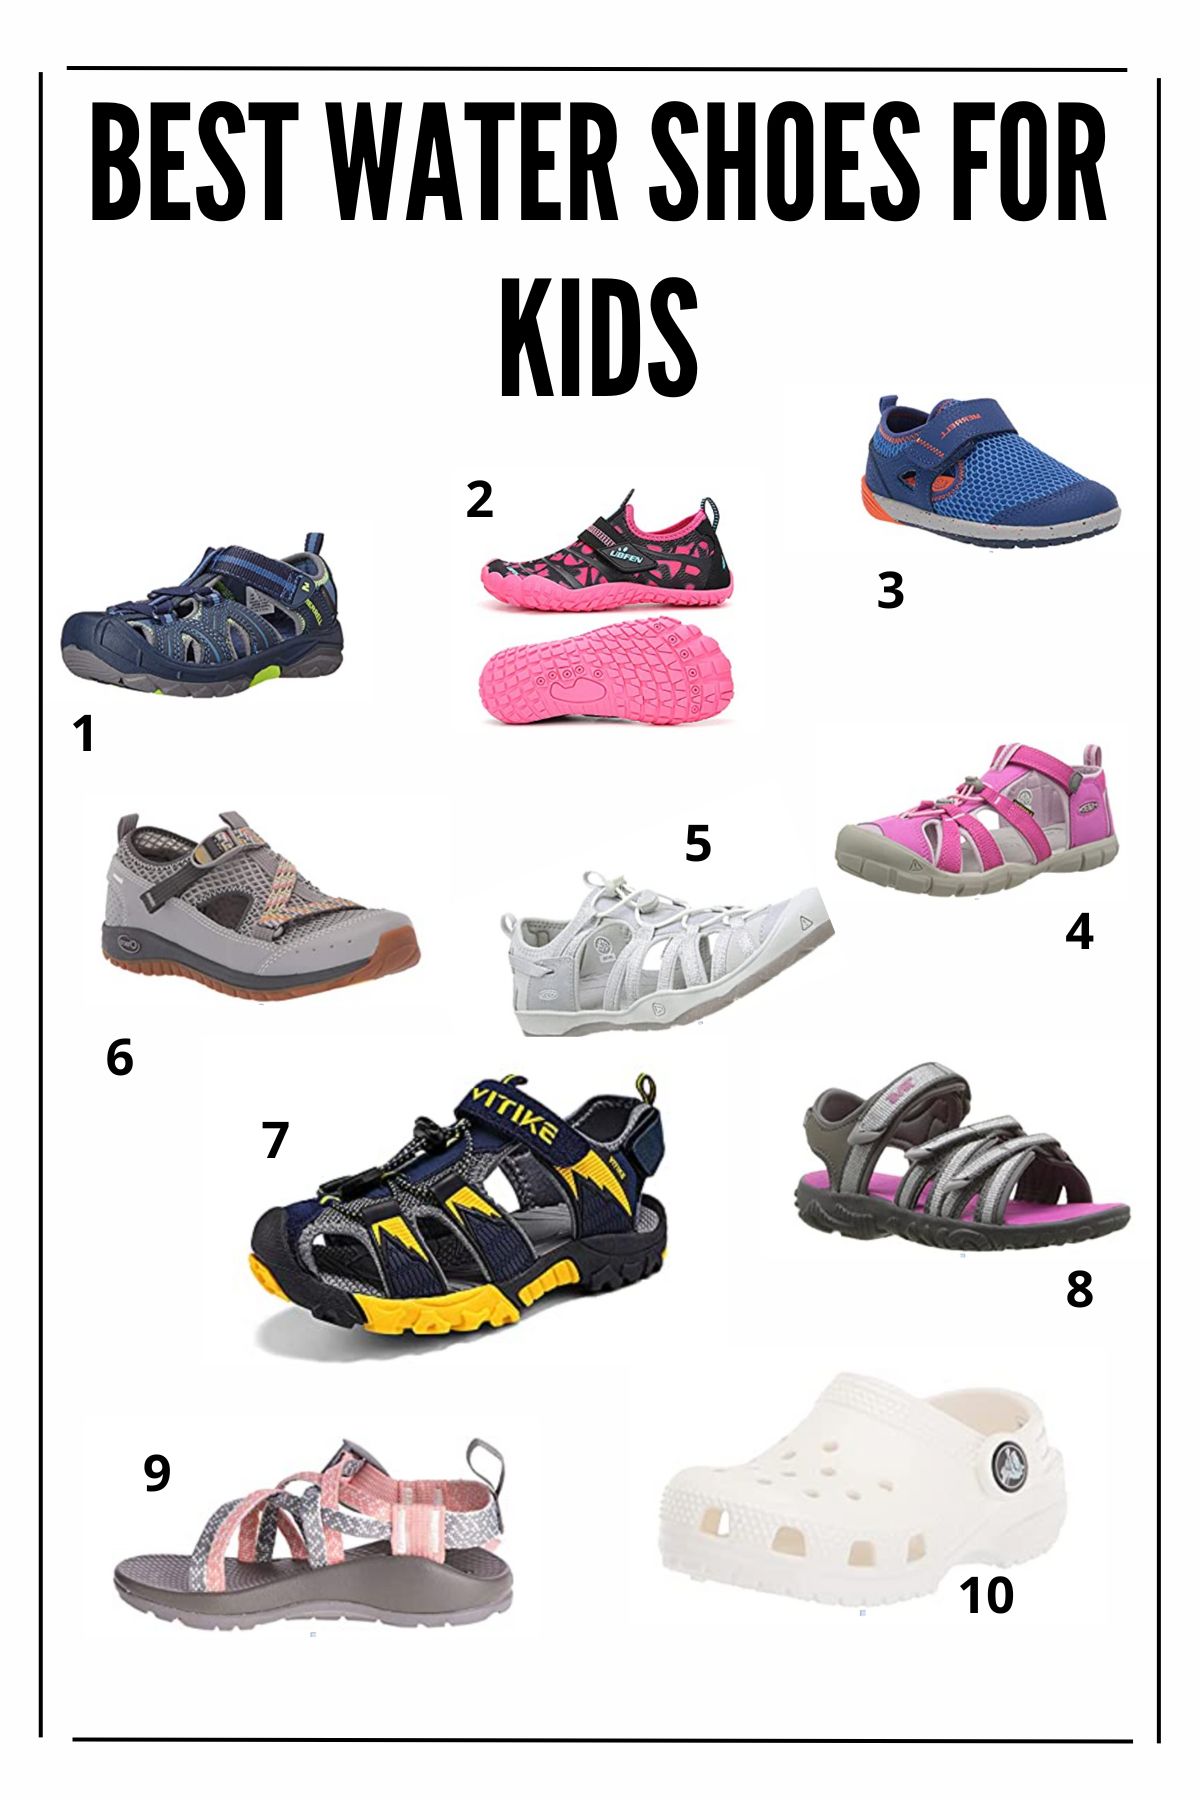 Top 10 Best Water Shoes for Kids